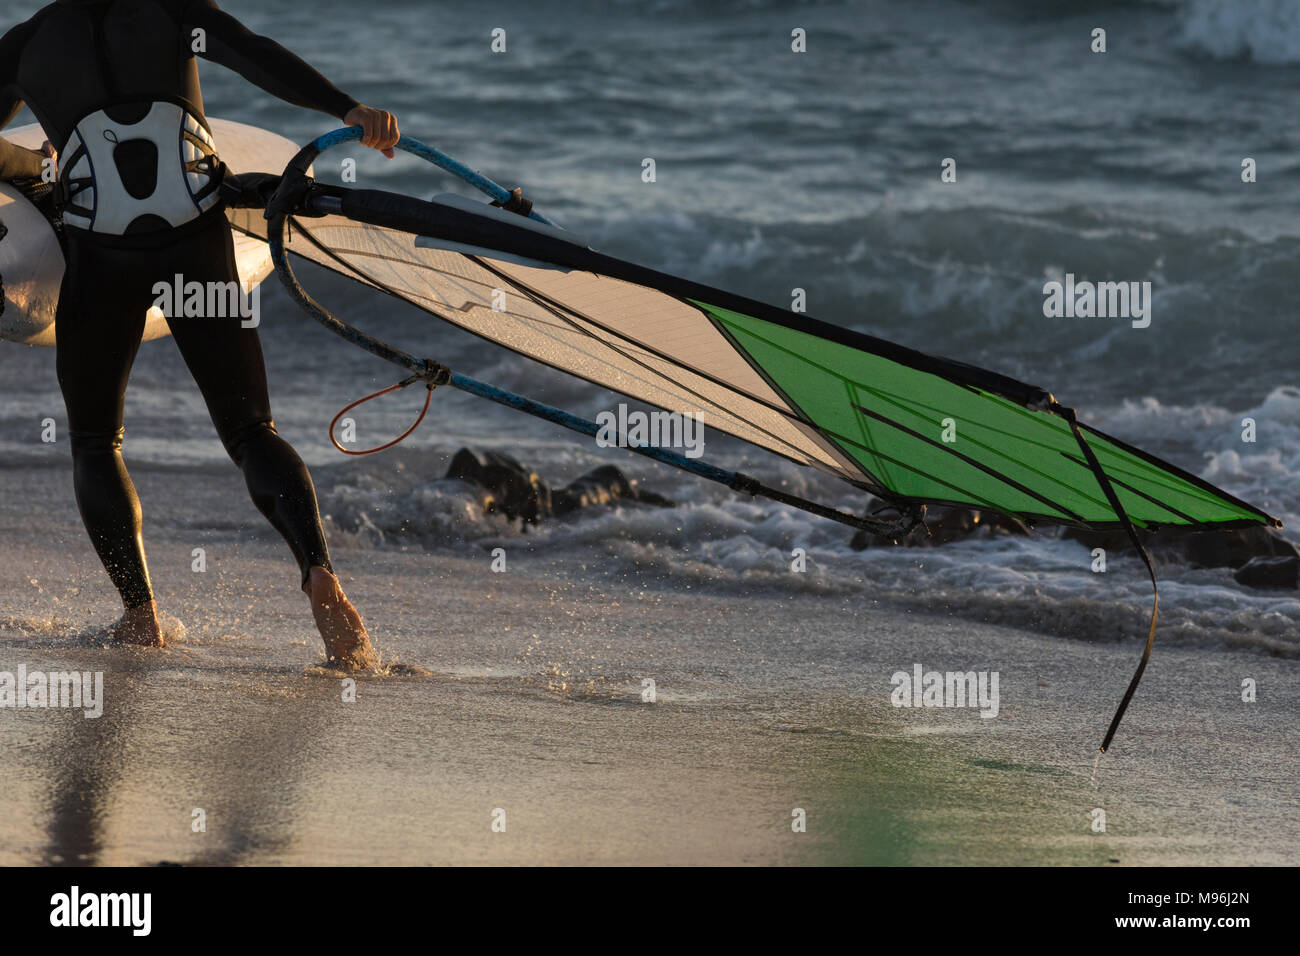 Male surfer holding a kite on the beach Stock Photo